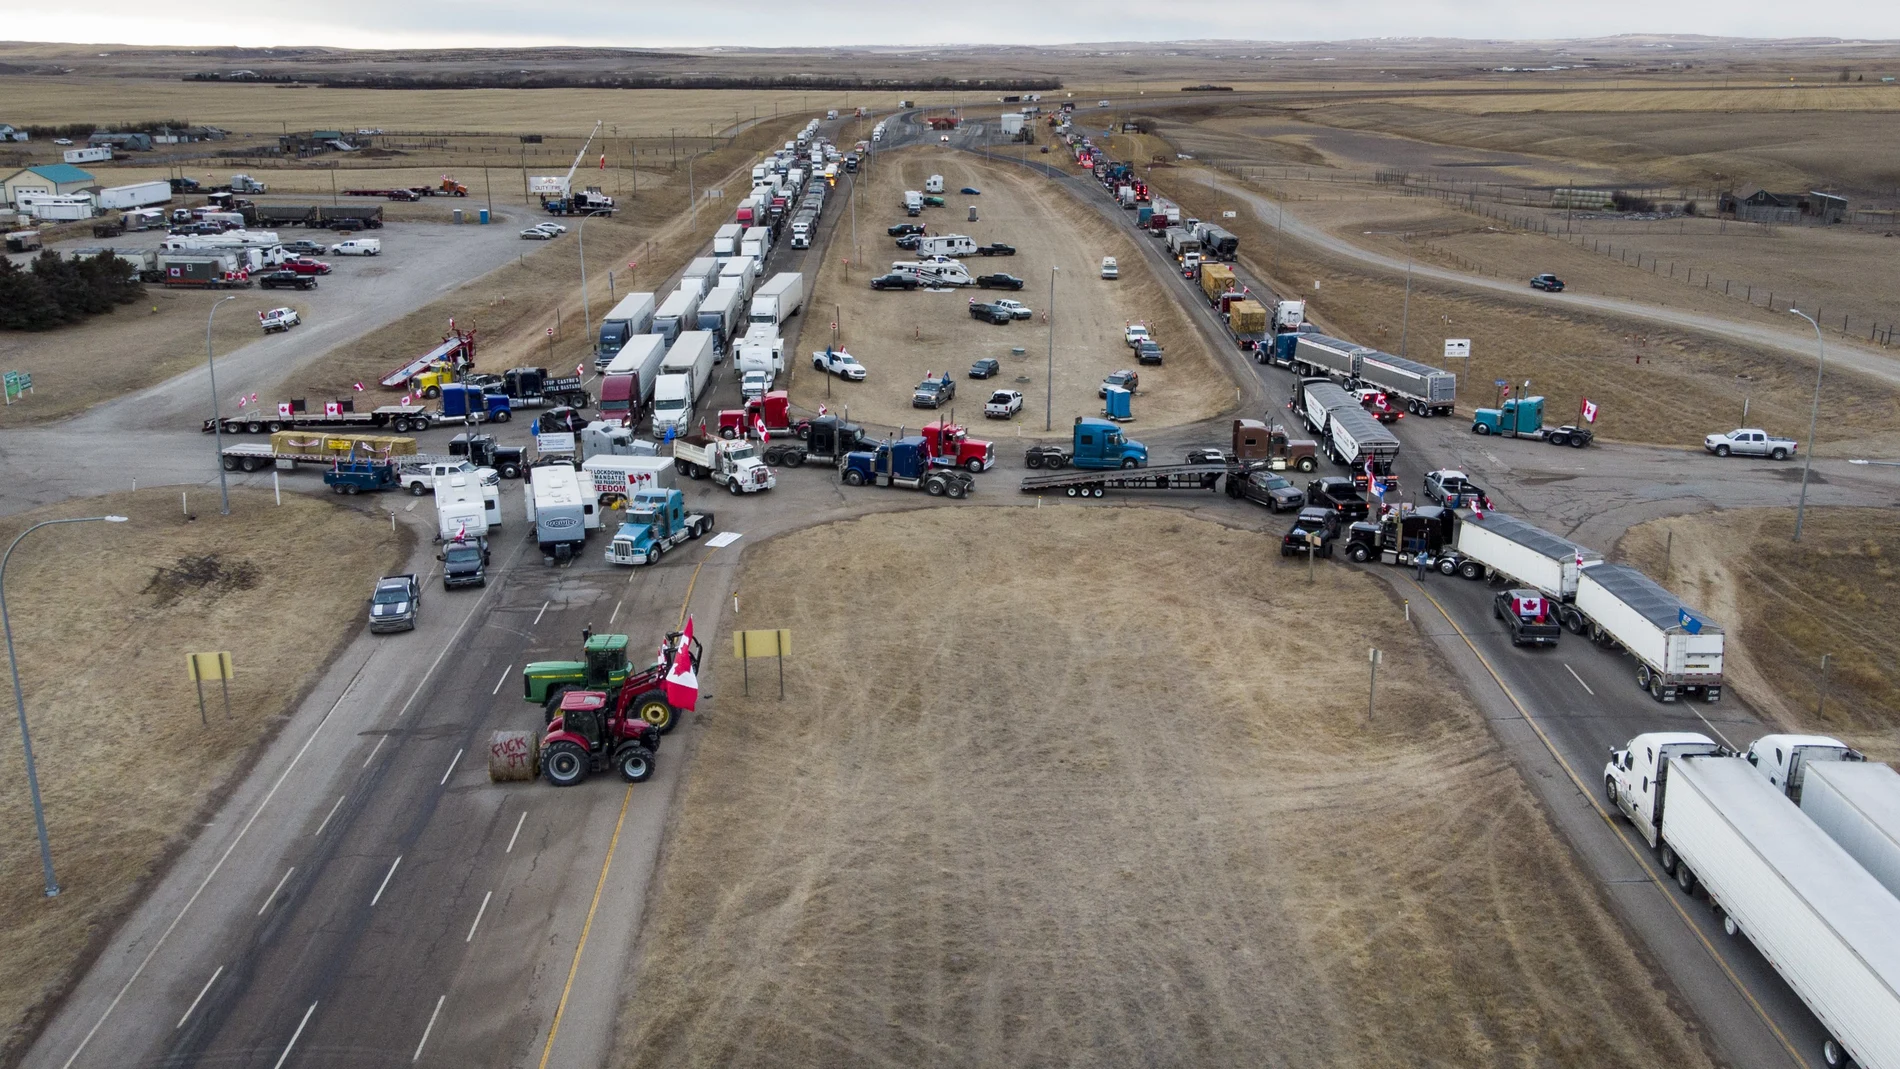 Anti-COVID-19 vaccine mandate demonstrators gather as a truck convoy blocks the highway at the busy U.S. border crossing in Coutts, Alberta, Canada, Monday, Jan. 31, 2022. (Jeff McIntosh/The Canadian Press via AP)